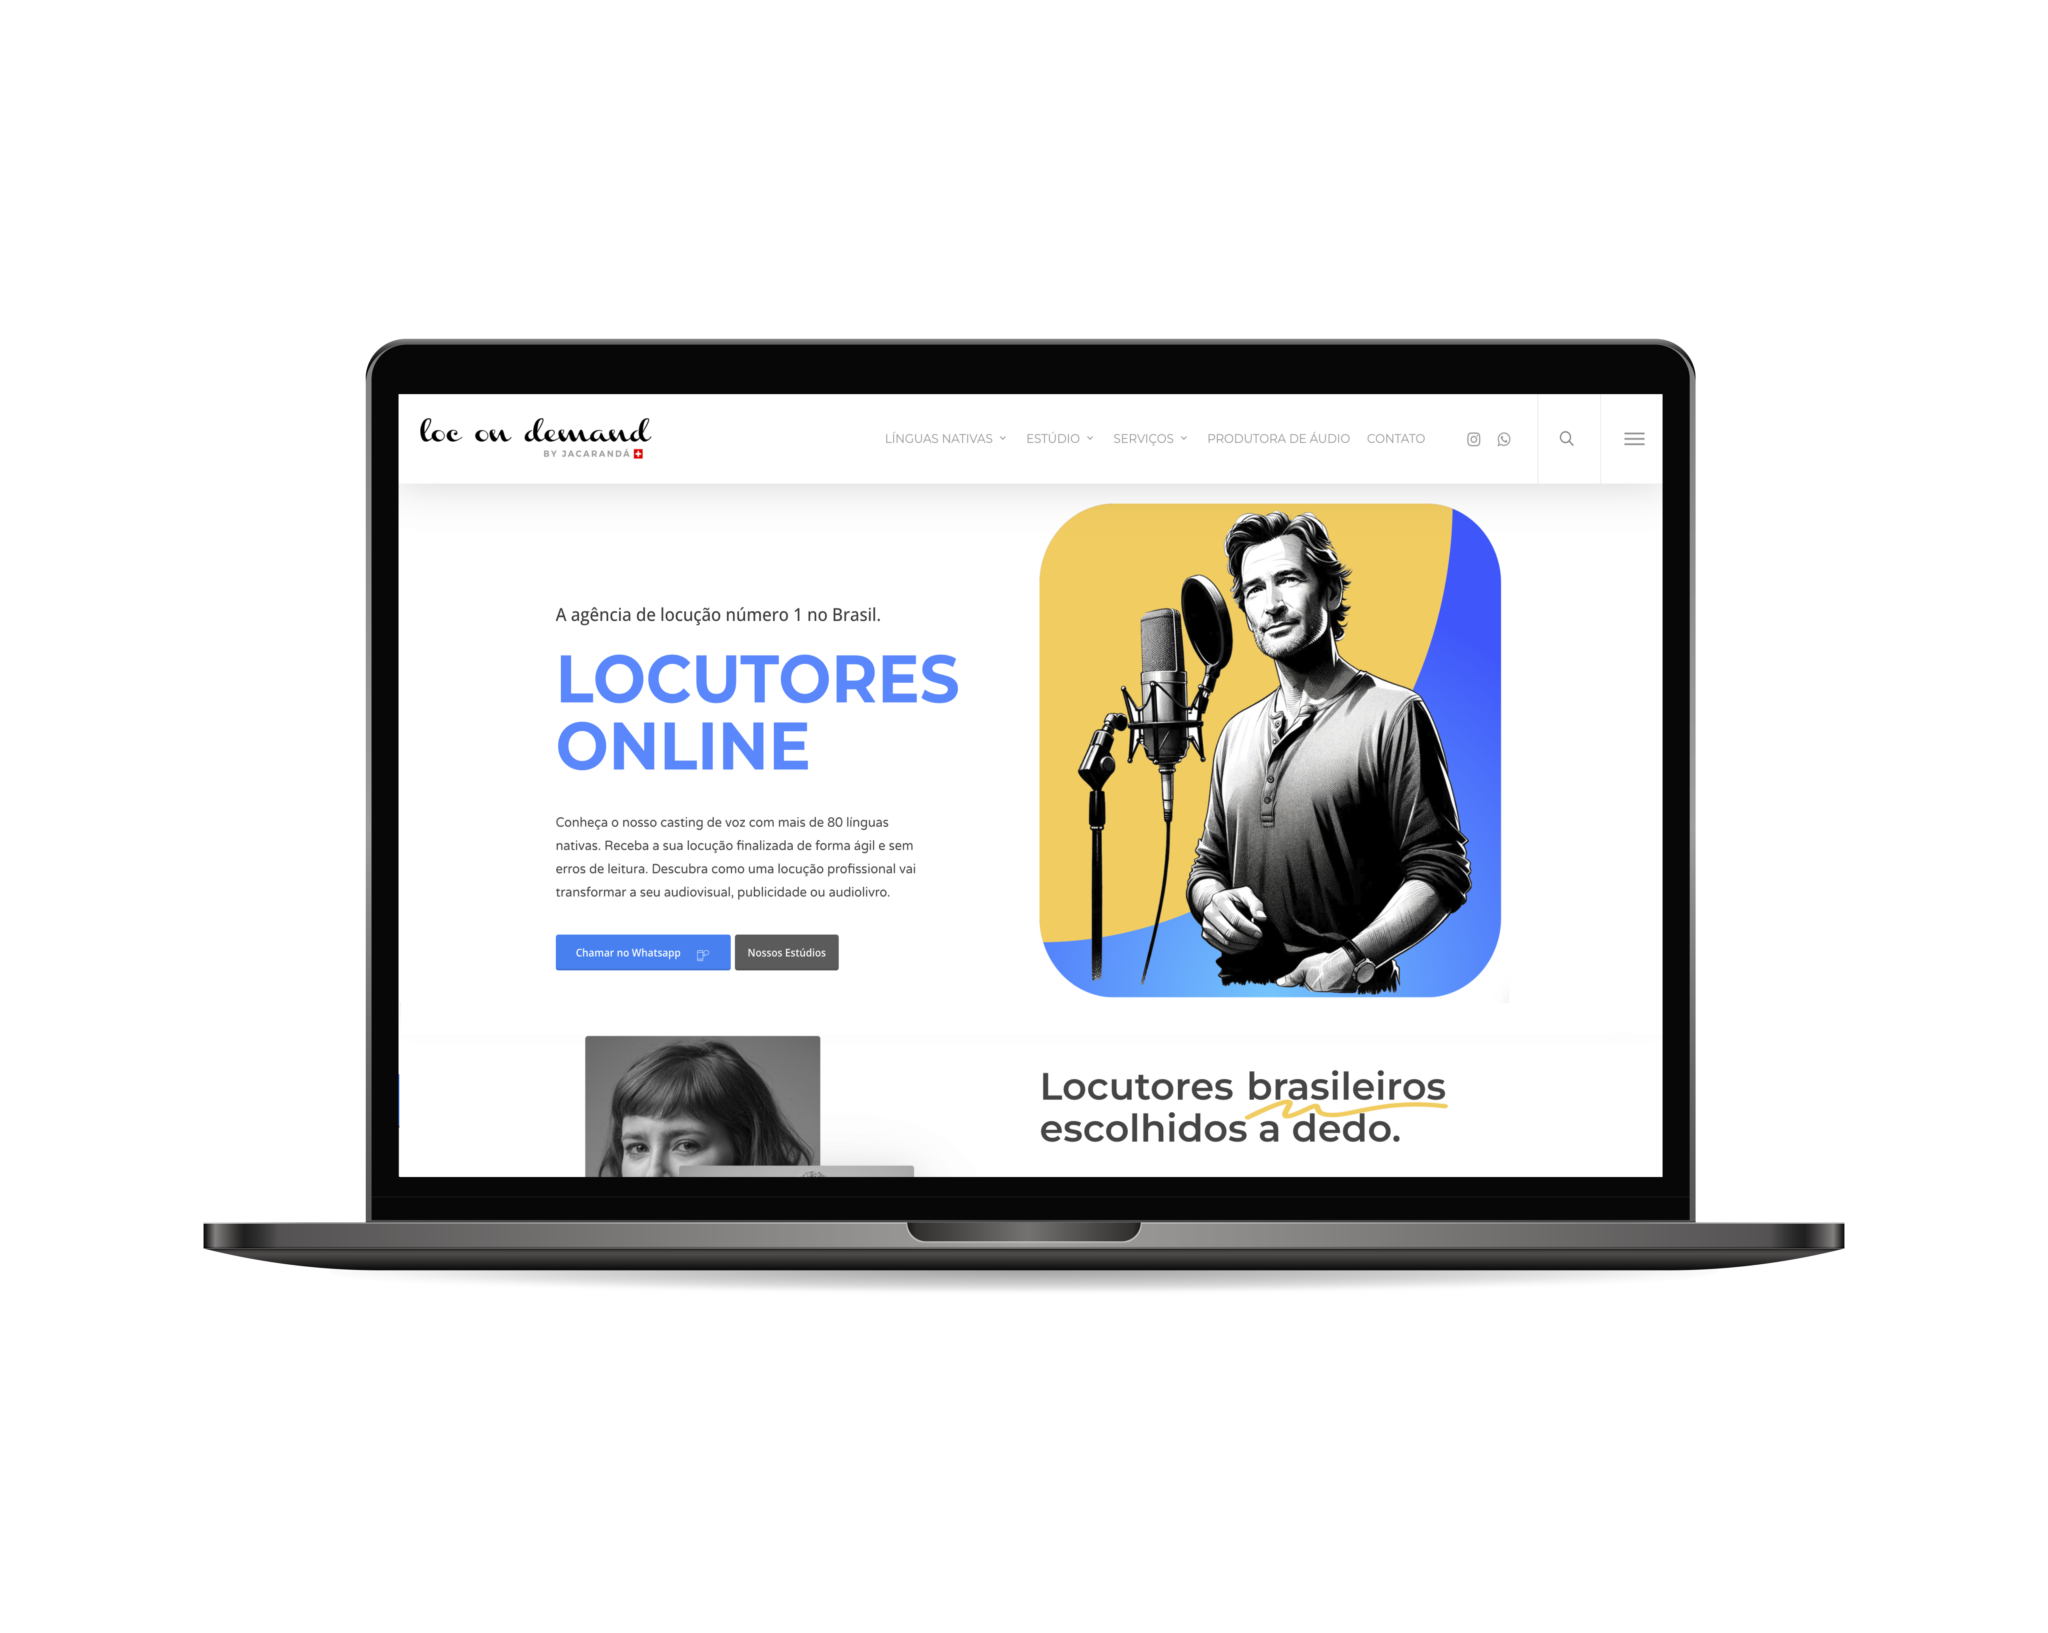 Locutores online2 | Online voice talent, commercial voiceover, voice bank, voice casting, professional voiceover. Do you need a voice that captures attention and delivers your message clearly and effectively? Then you need professional voiceover services!